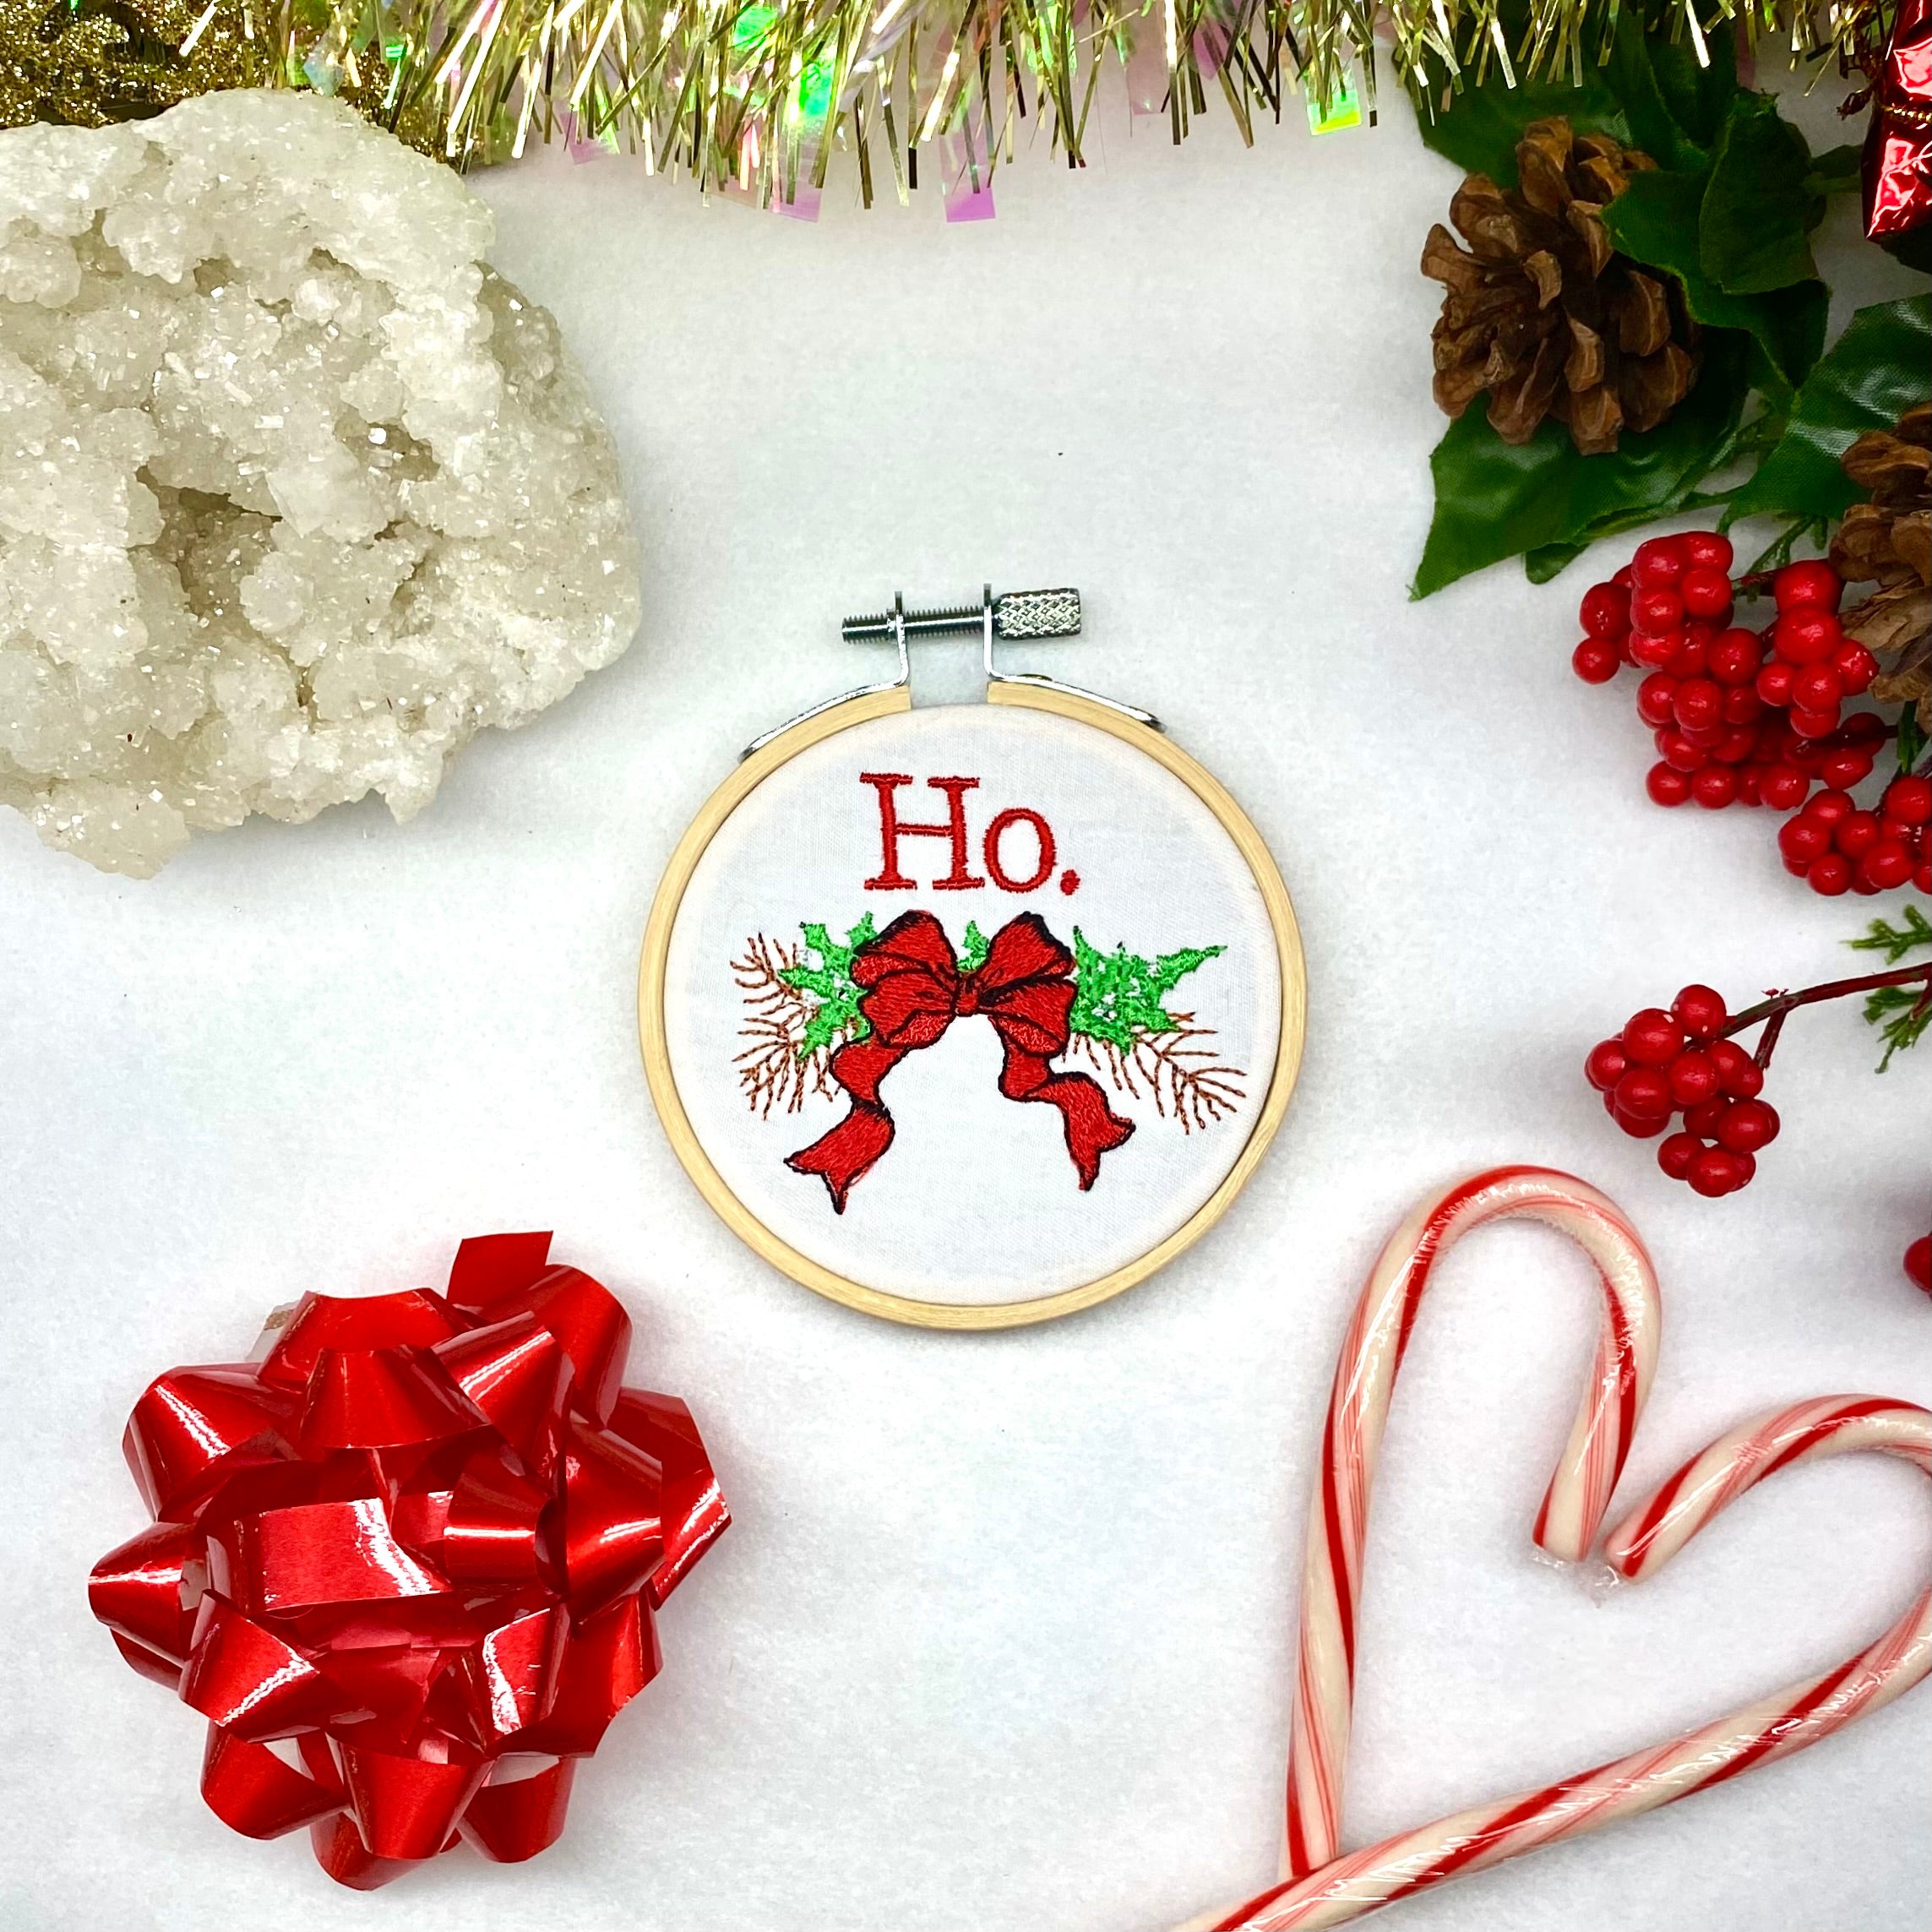 Ho. Christmas Themed with Bow Embroidery Hoop 3-inch